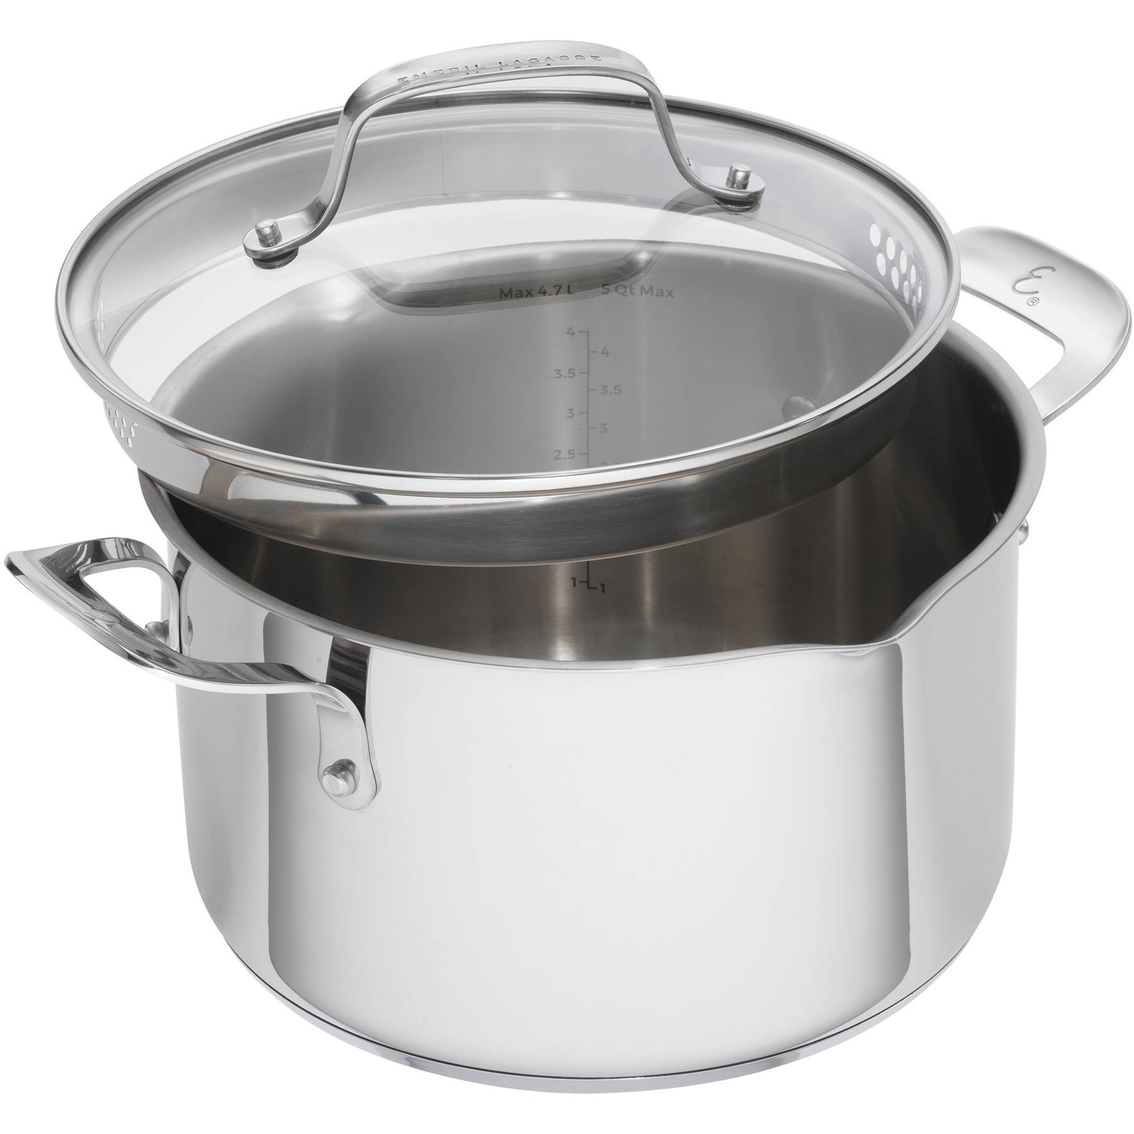 Emeril Stainless Steel 5 qt. Dutch Oven With Lid - Image 3 of 3